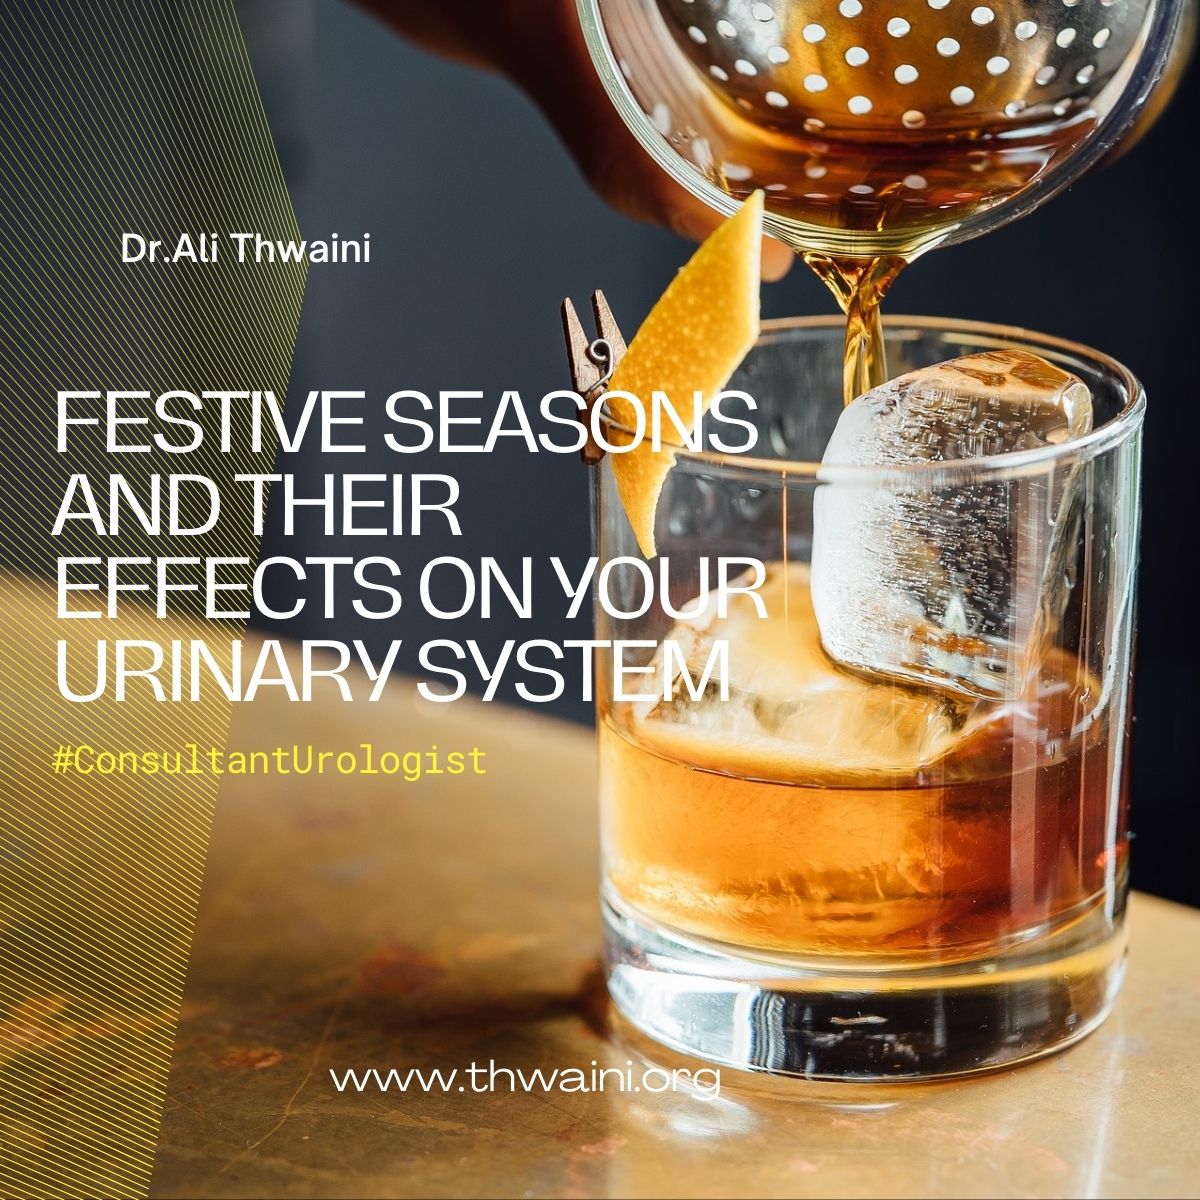 Festive Seasons and their Effects on your Urinary System